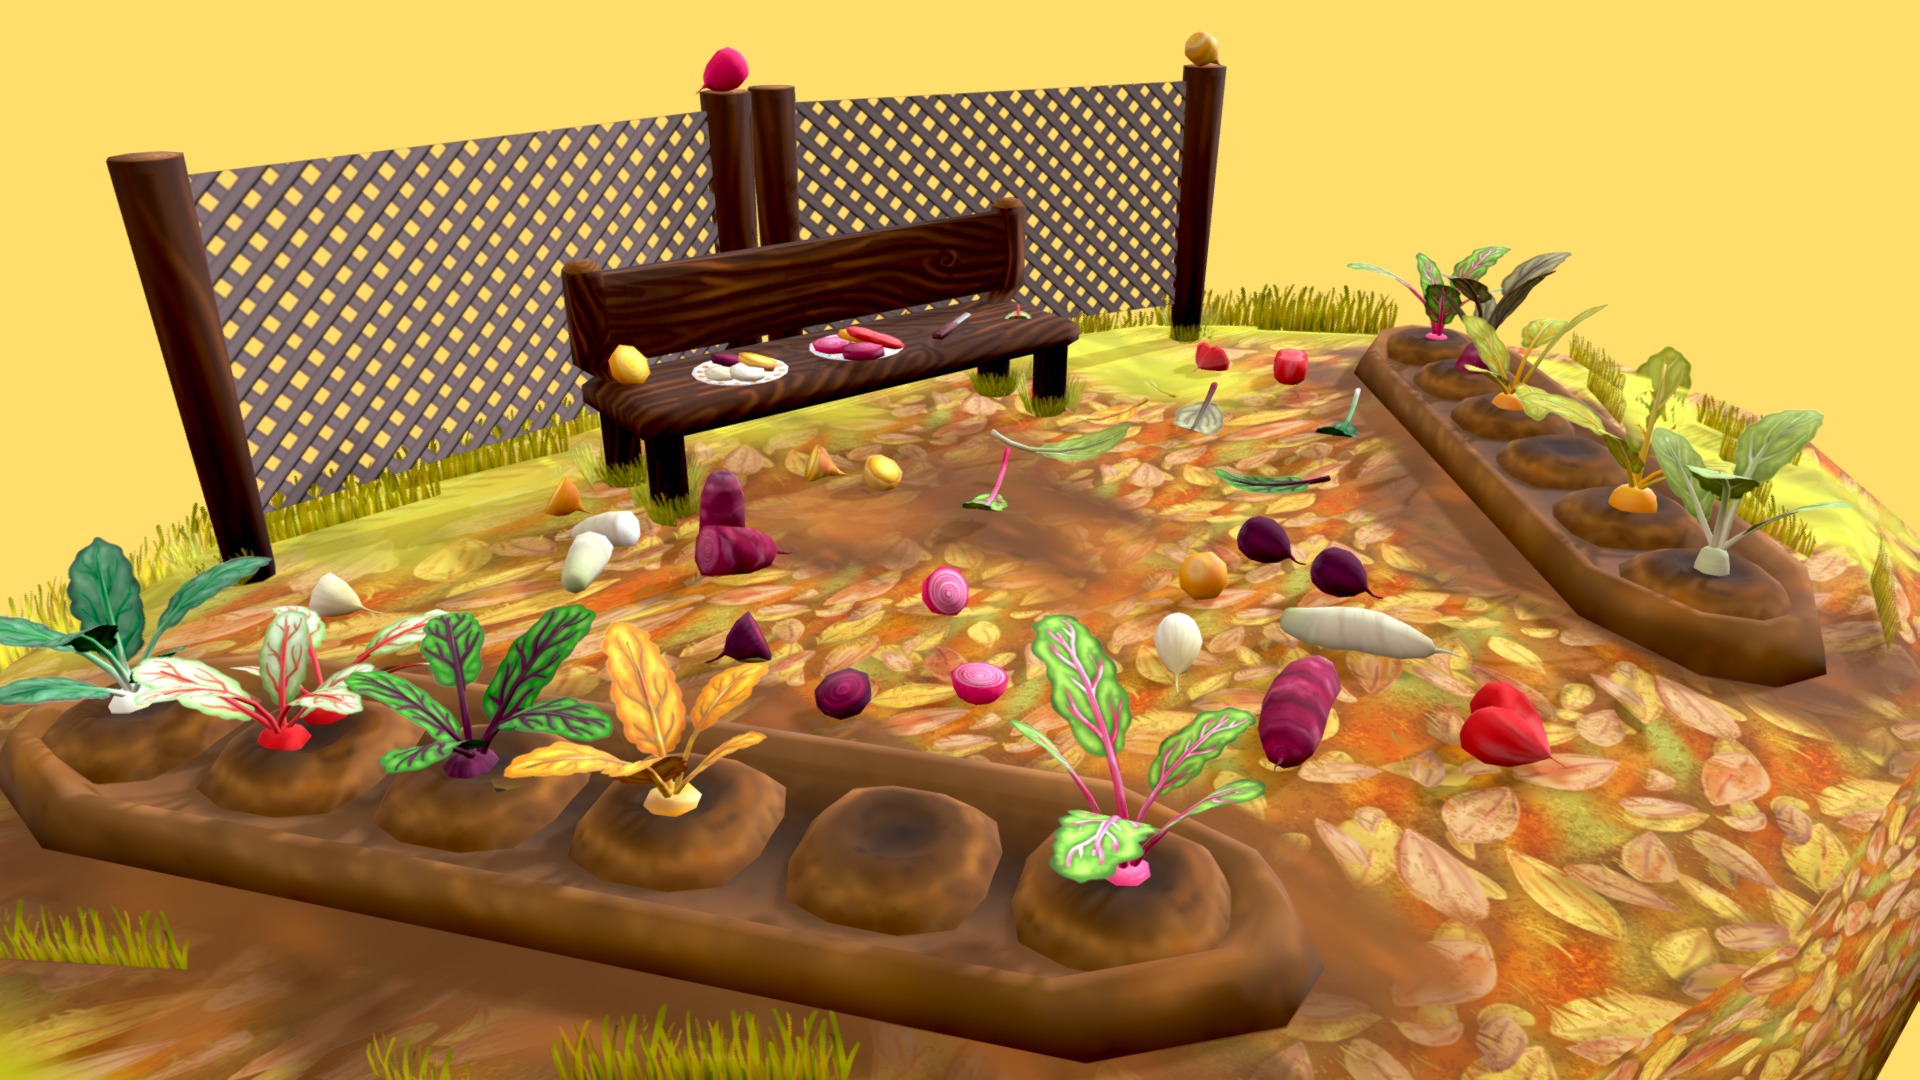 3D model Farm Life – Beetroot Patch - This is a 3D model of the Farm Life - Beetroot Patch. The 3D model is about a table with a chair and plants on it.